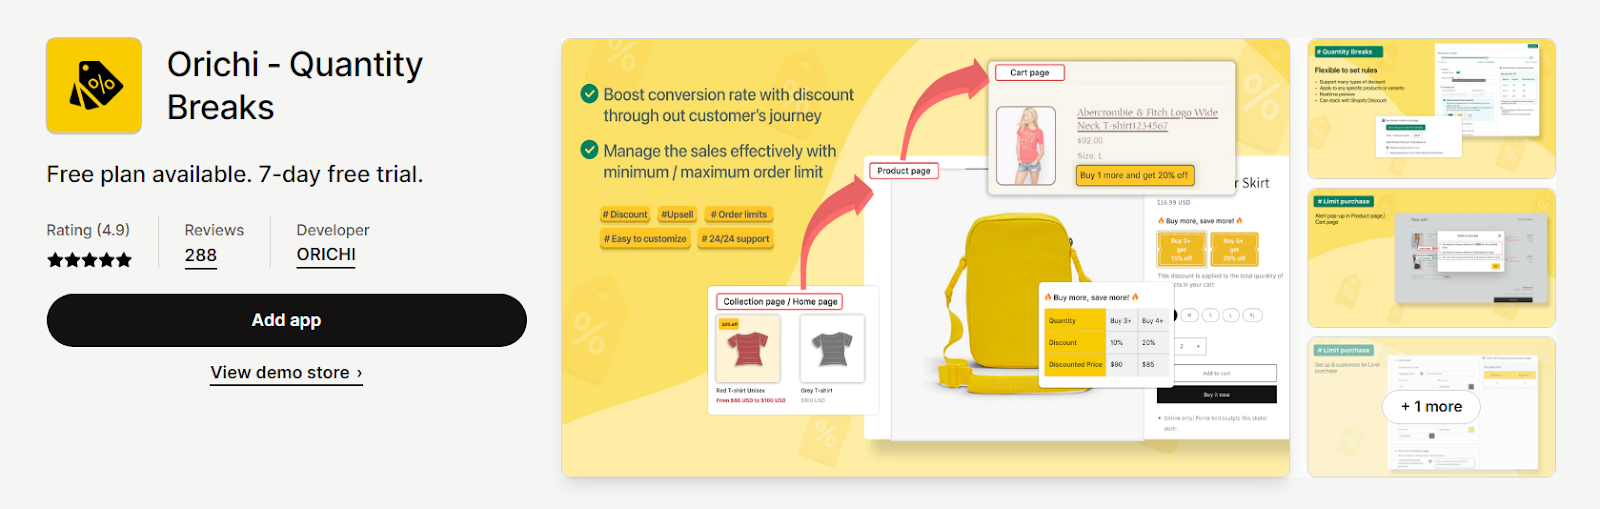 Orichi - Quantity Breaks - A volume-based Shopify volume discount app with a countdown timer for urgency.